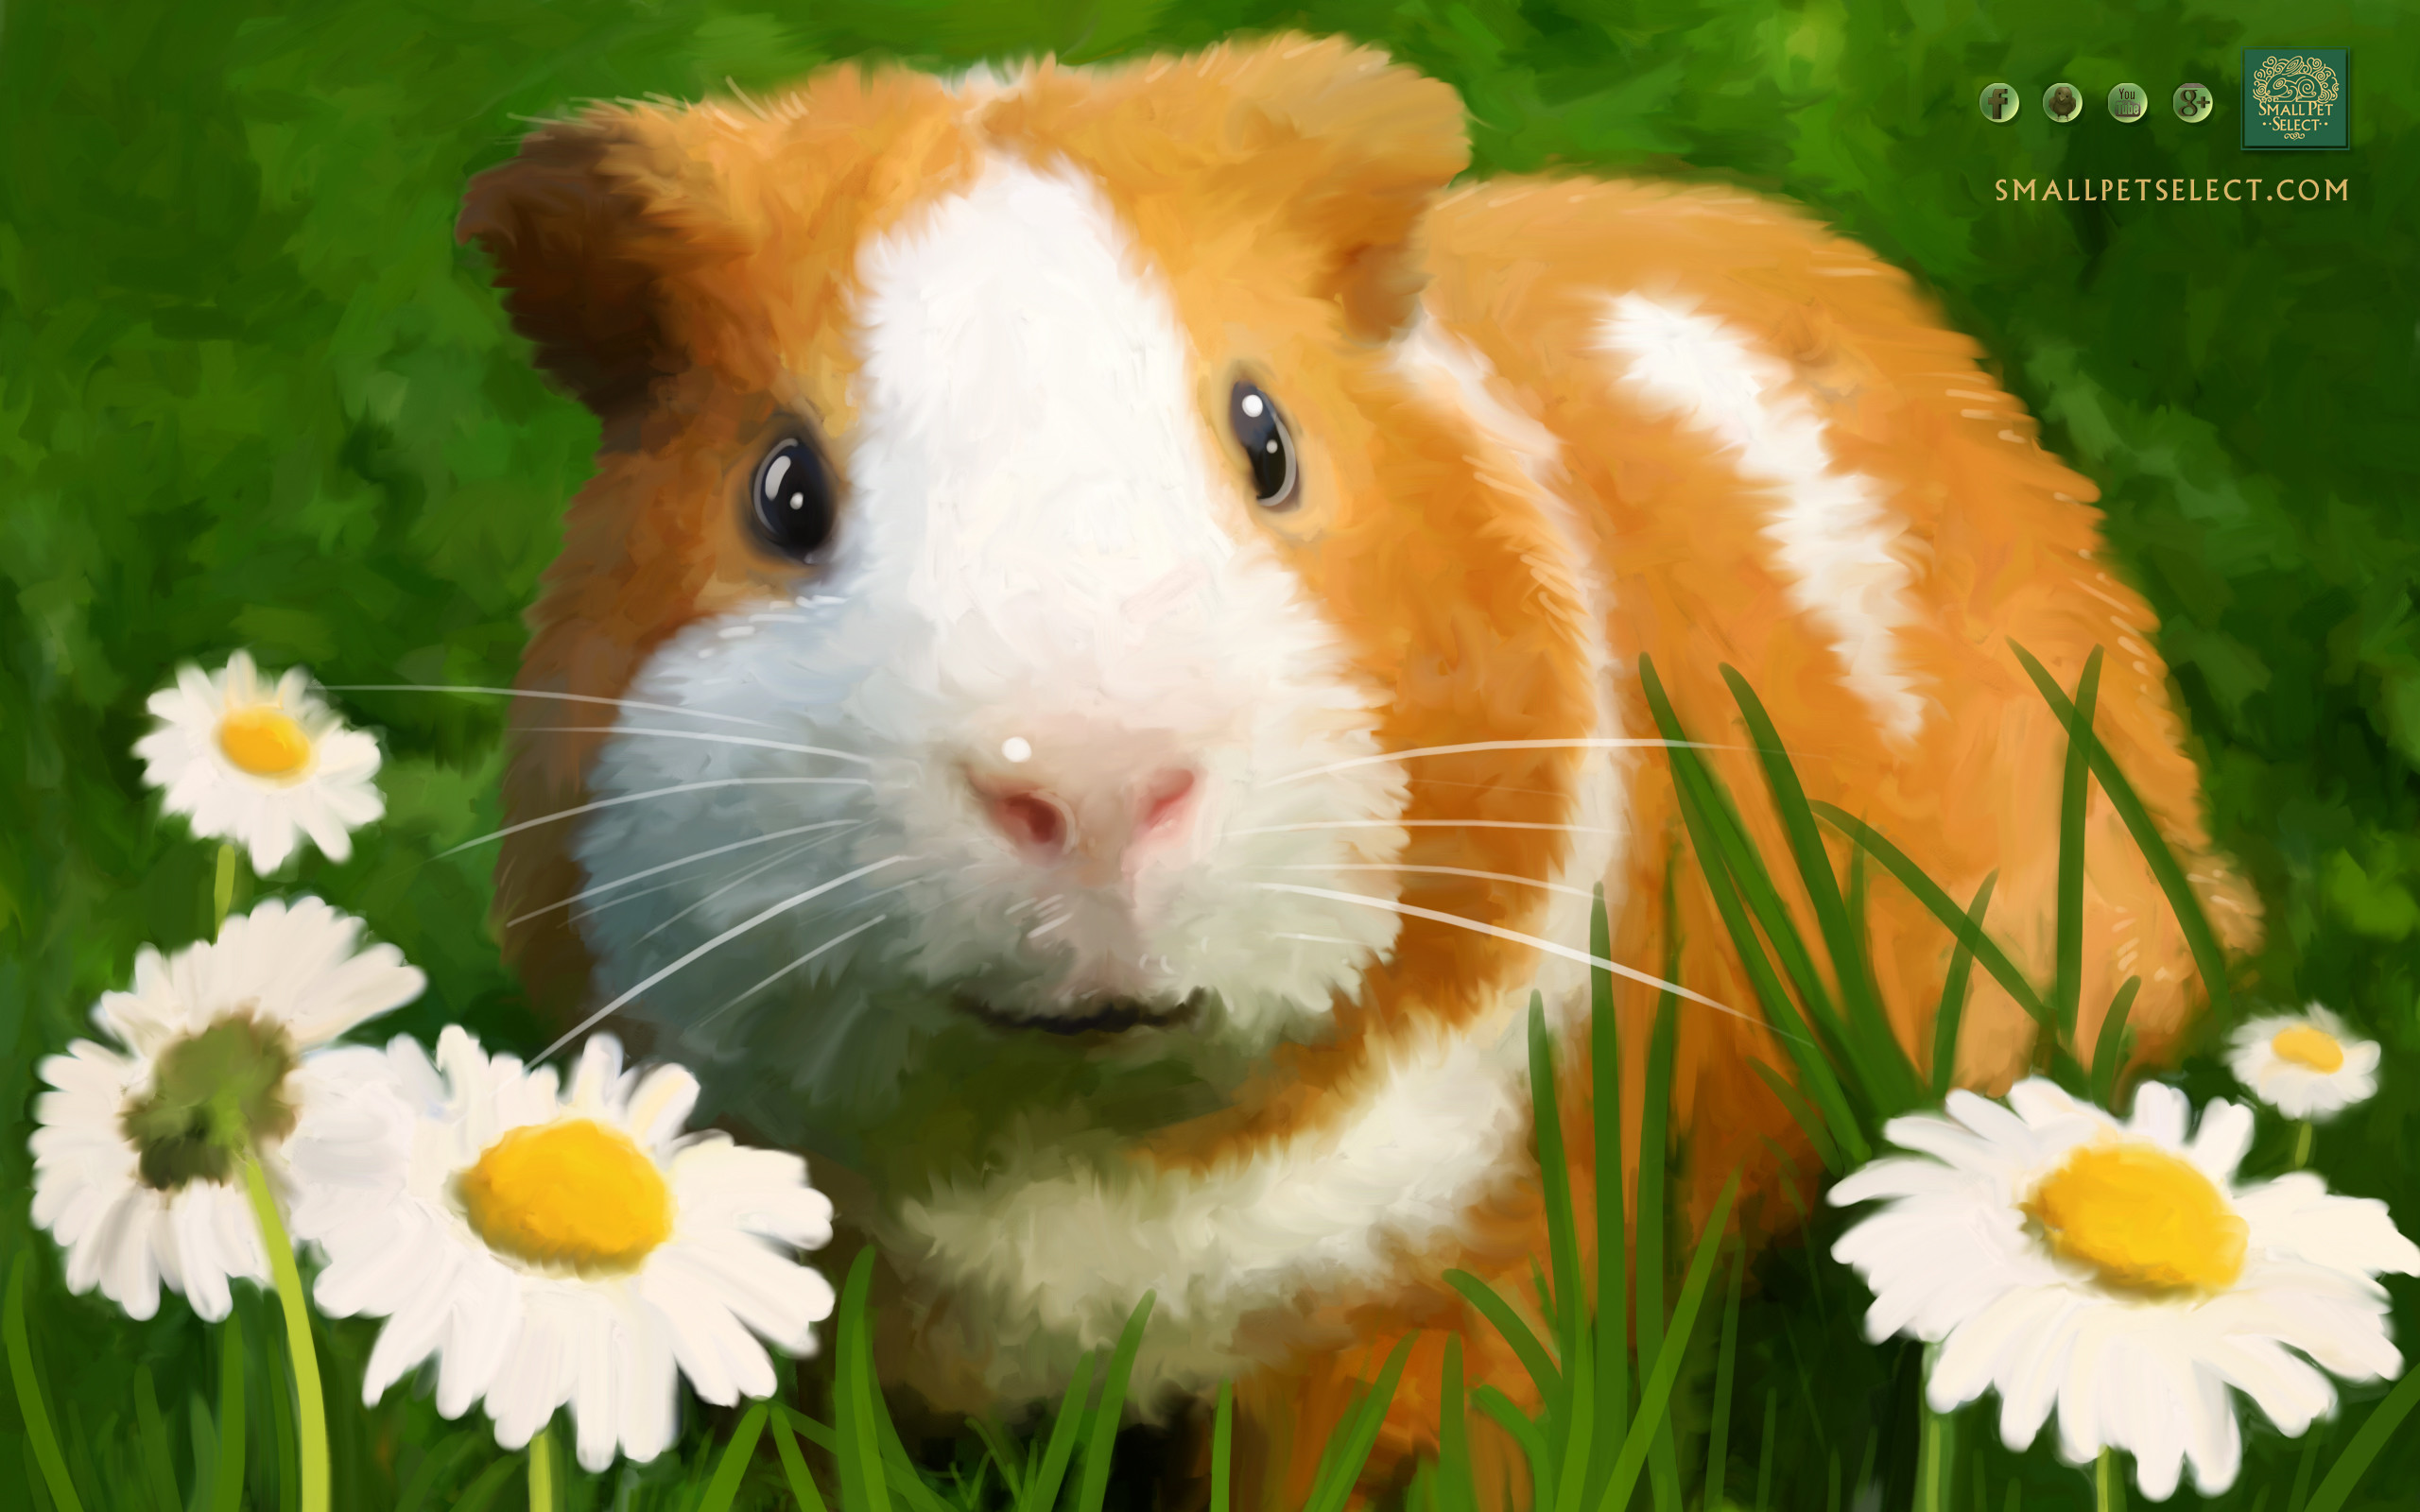 2560x1600 Guinea Pig Wallpaper - Screensaver for your PC, MAC, Ipad & cell phone